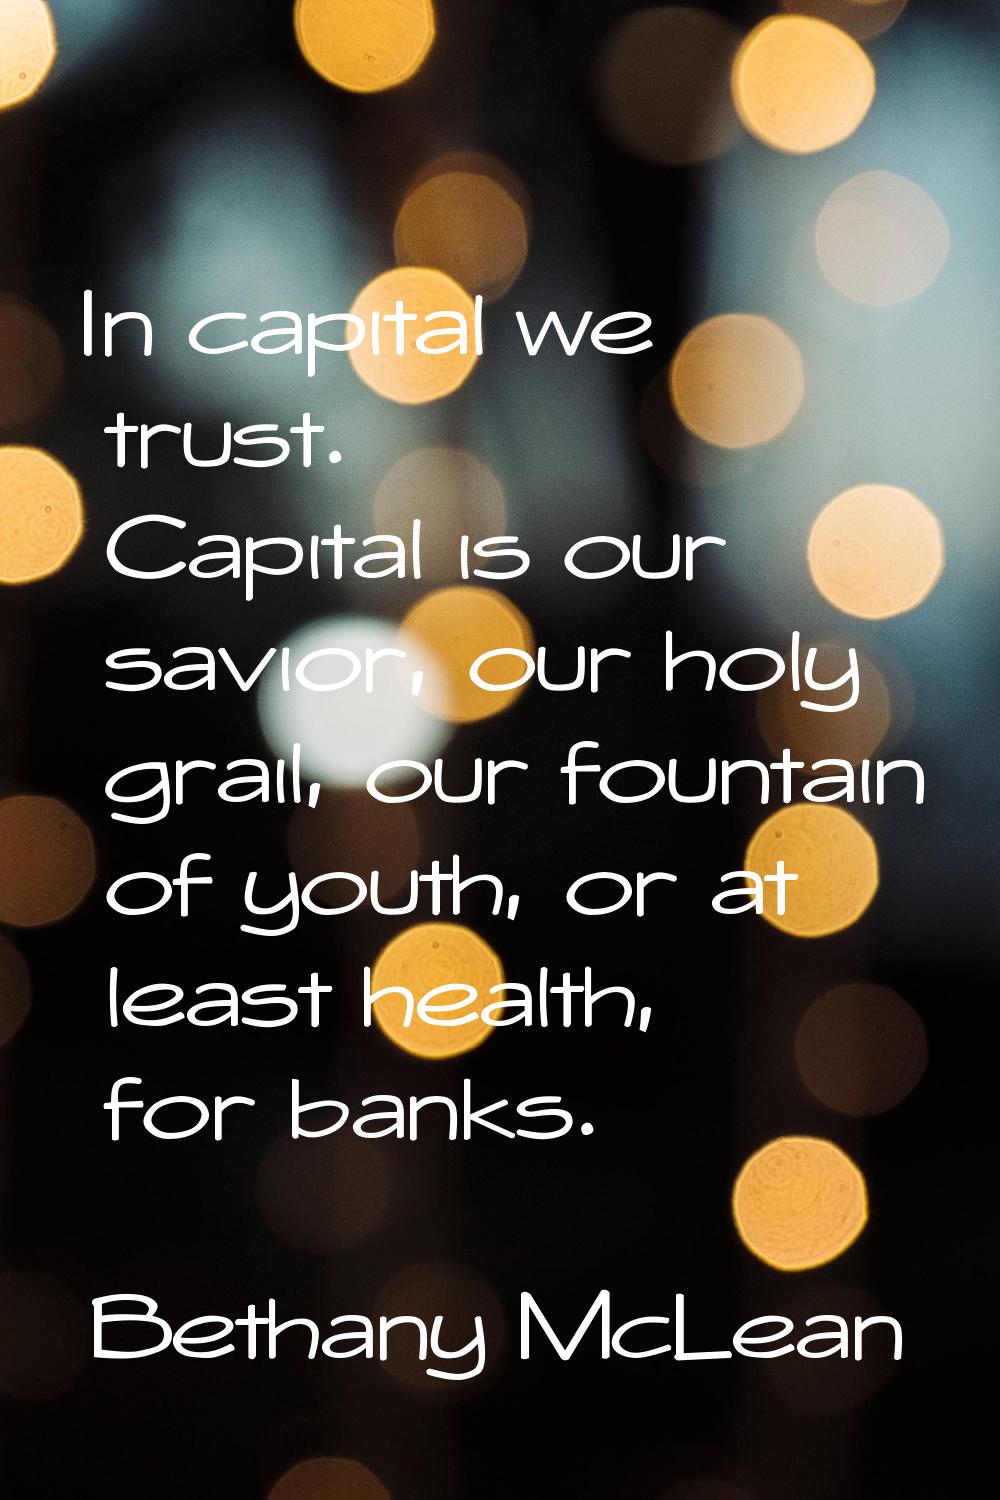 In capital we trust. Capital is our savior, our holy grail, our fountain of youth, or at least heal